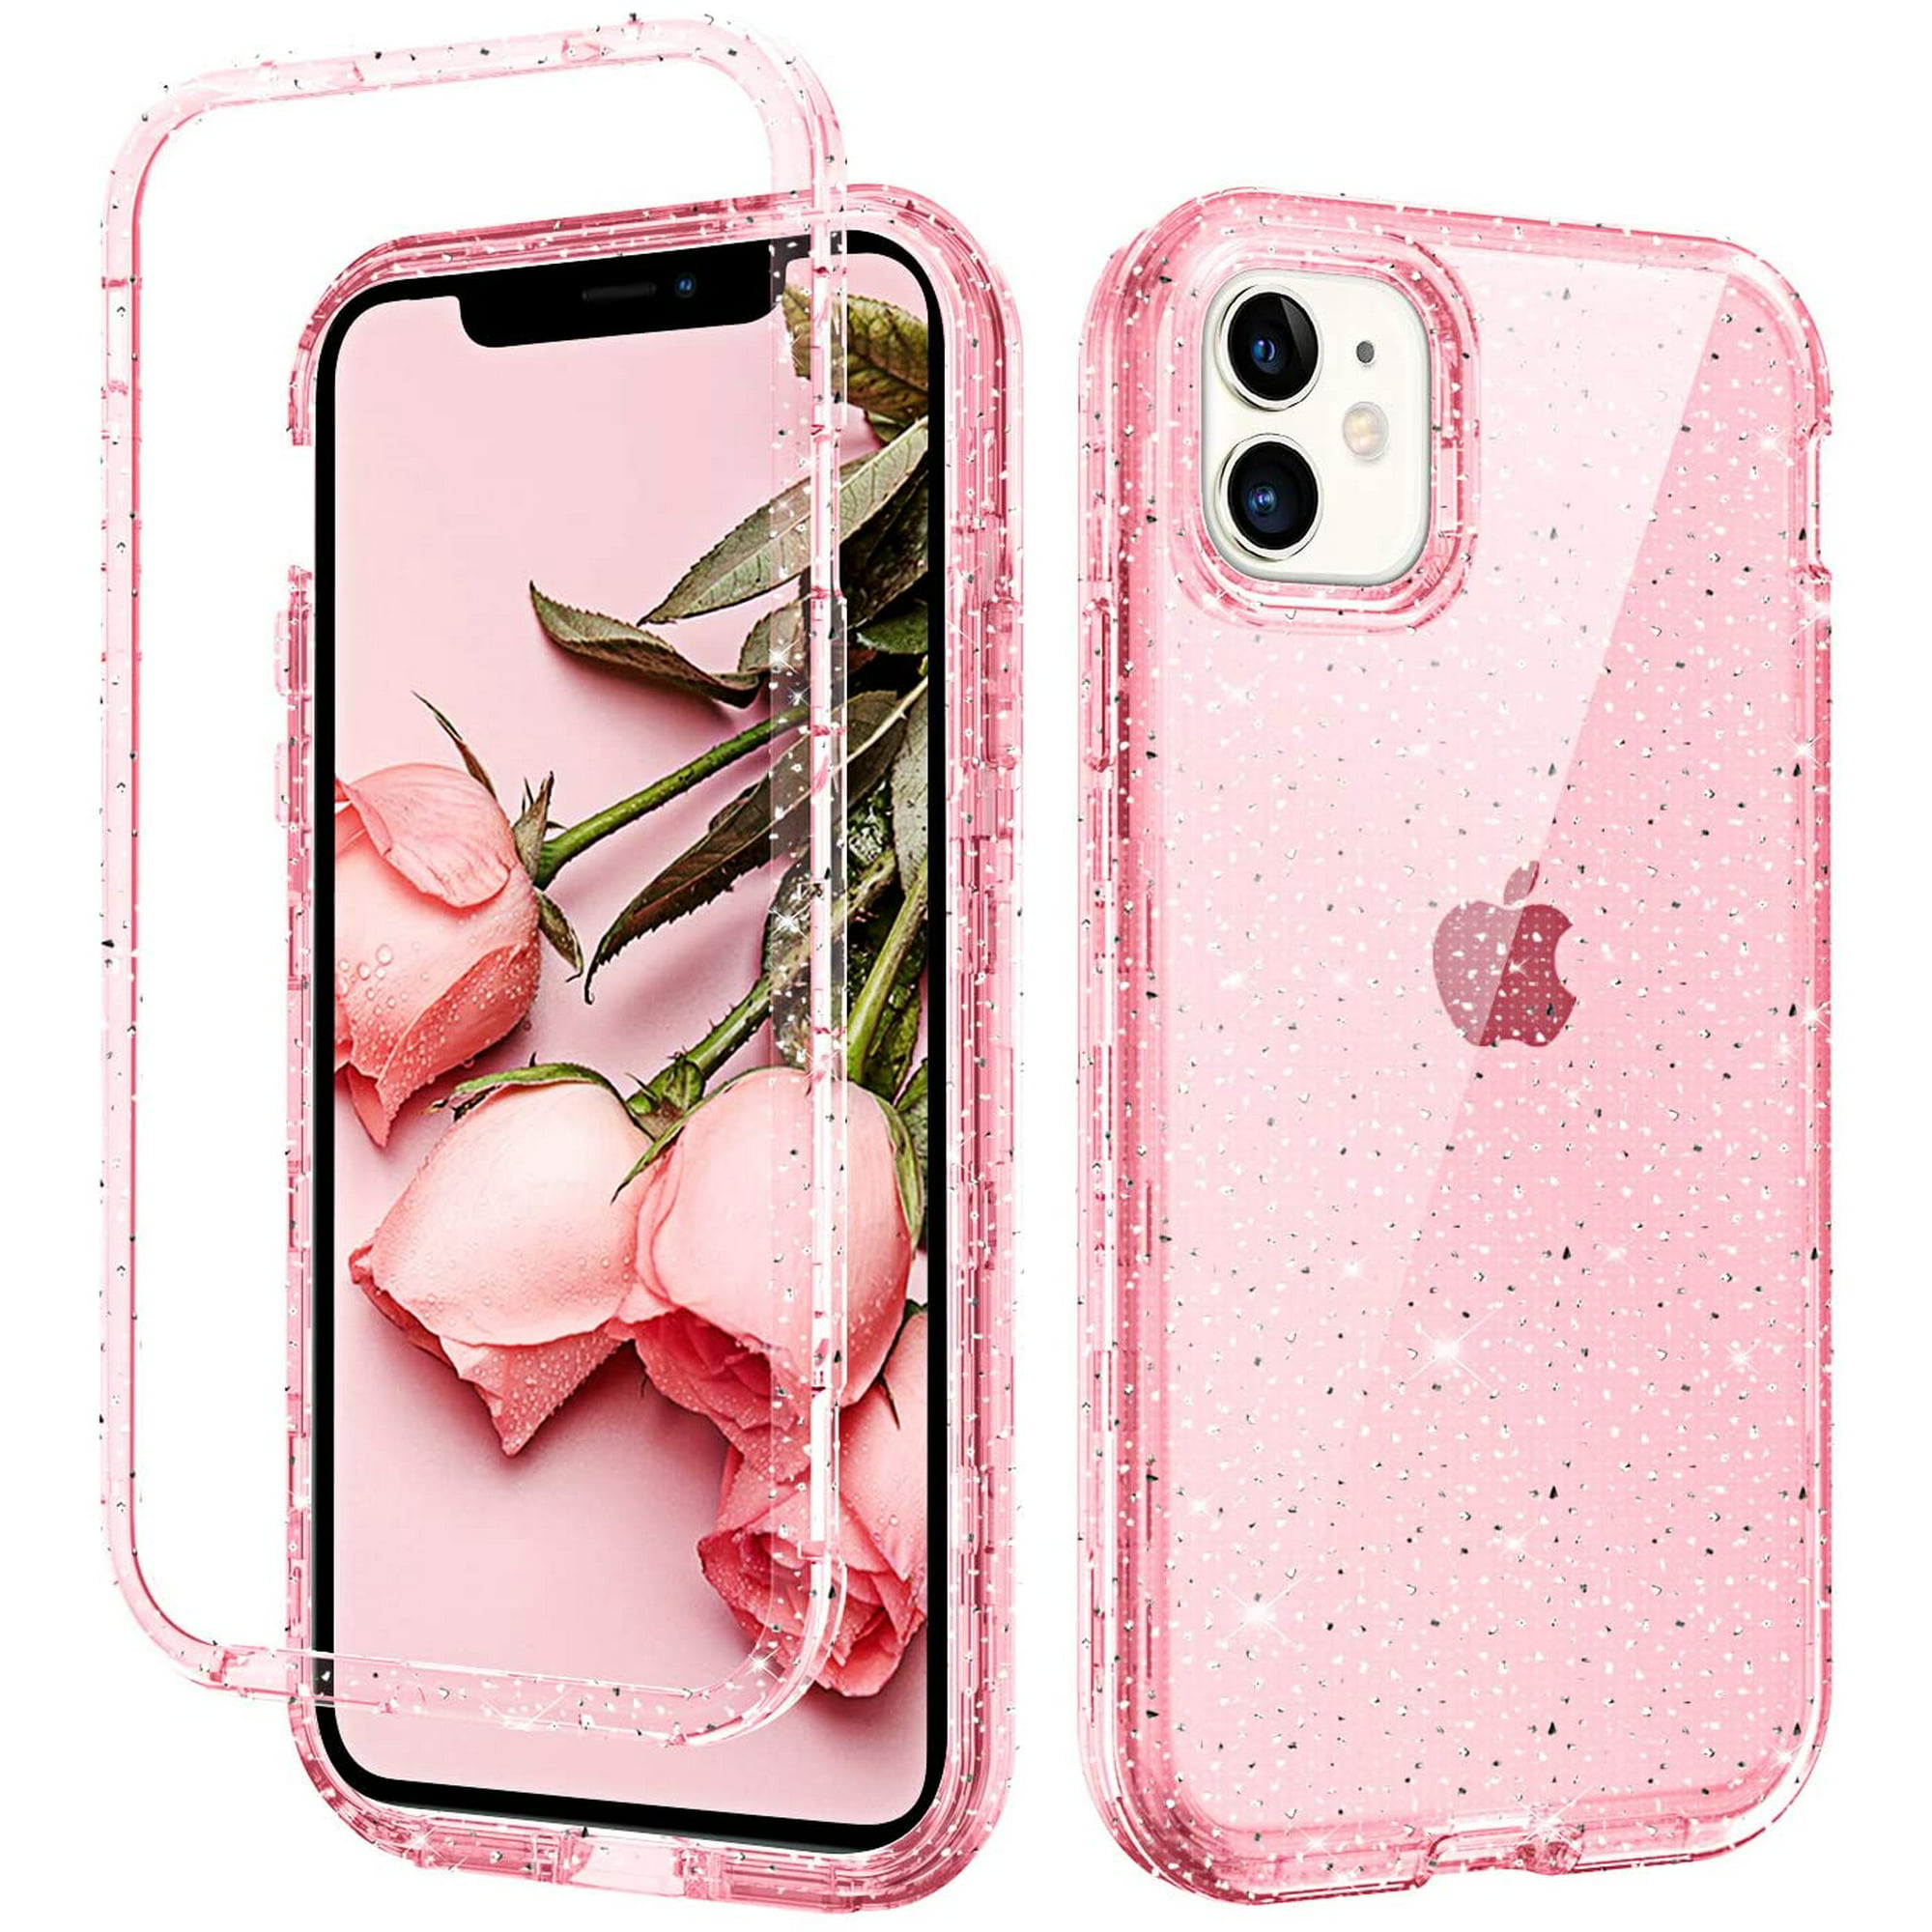 Guagua Iphone 11 Case 6 1 Inch Pink Glitter Bling Crystal Clear Shiny Cover For Girls Women Hybrid 3 In 1 Hard Pc Soft Walmart Canada